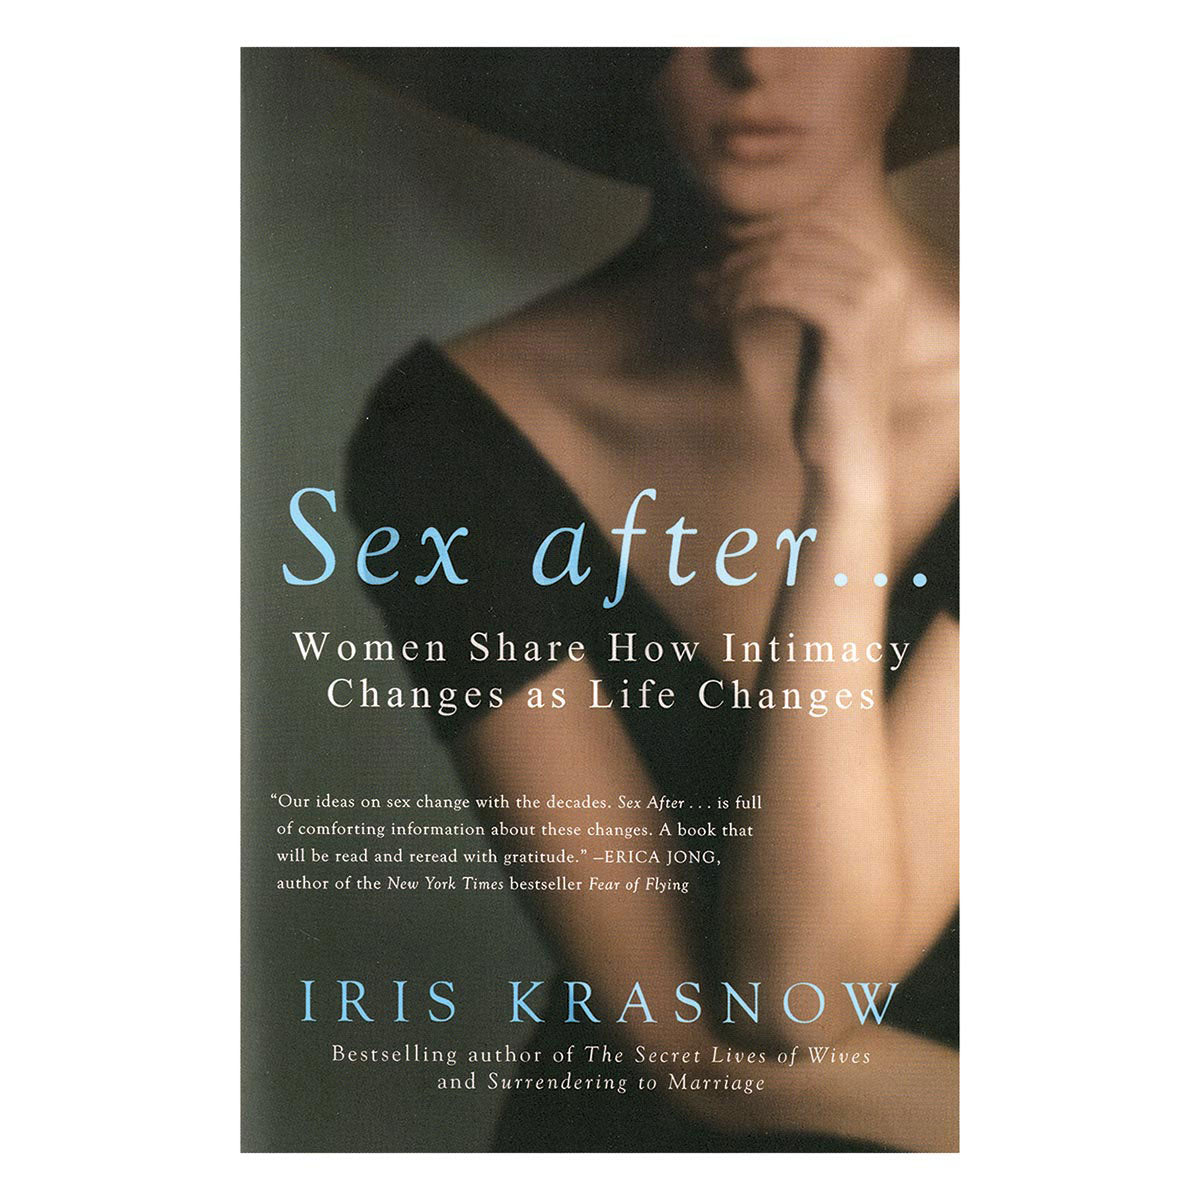 Sex After... Women Share How Intimacy Changes as Life Changes - Penguin